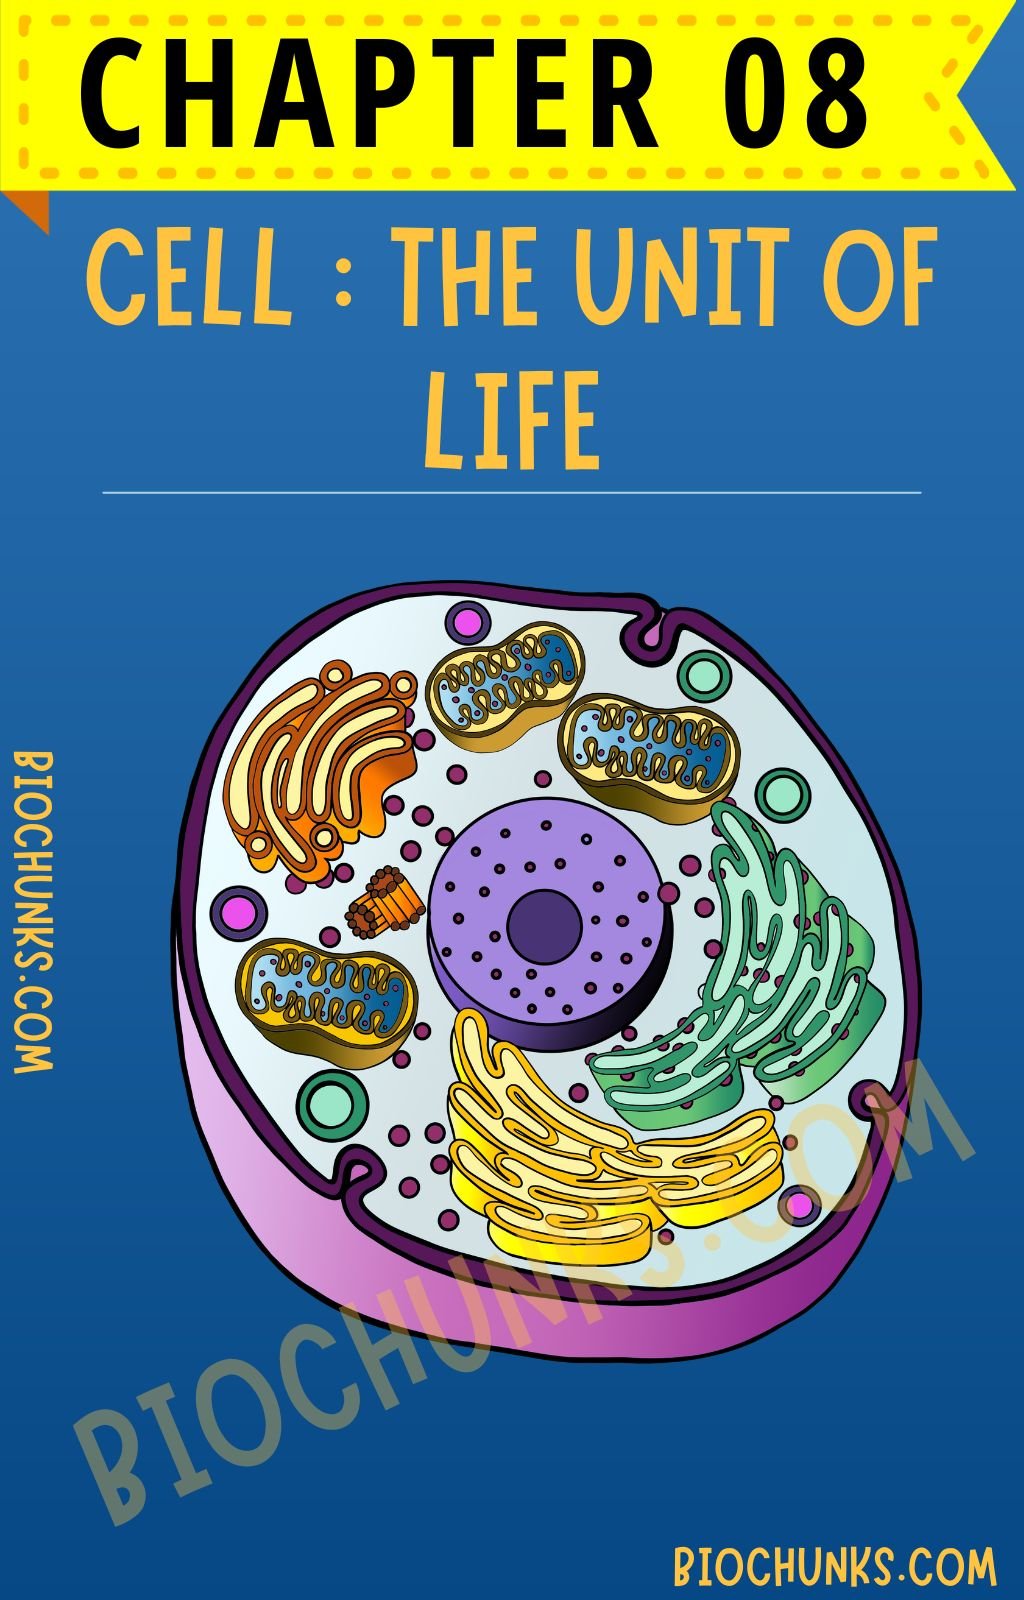 Cell : The Unit of Life Chapter 08 Class 11th biochunks.com